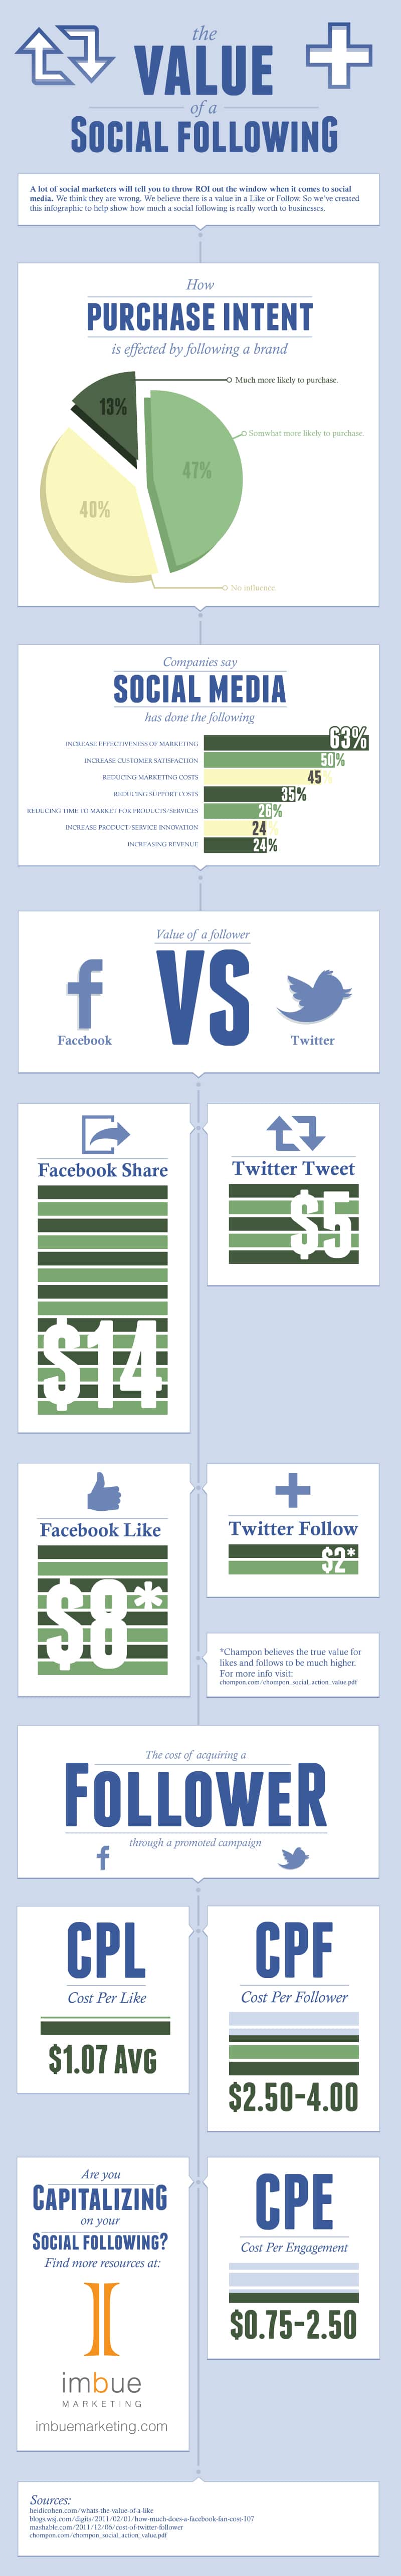 The Monetary Value Of A Social Following [Infographic]